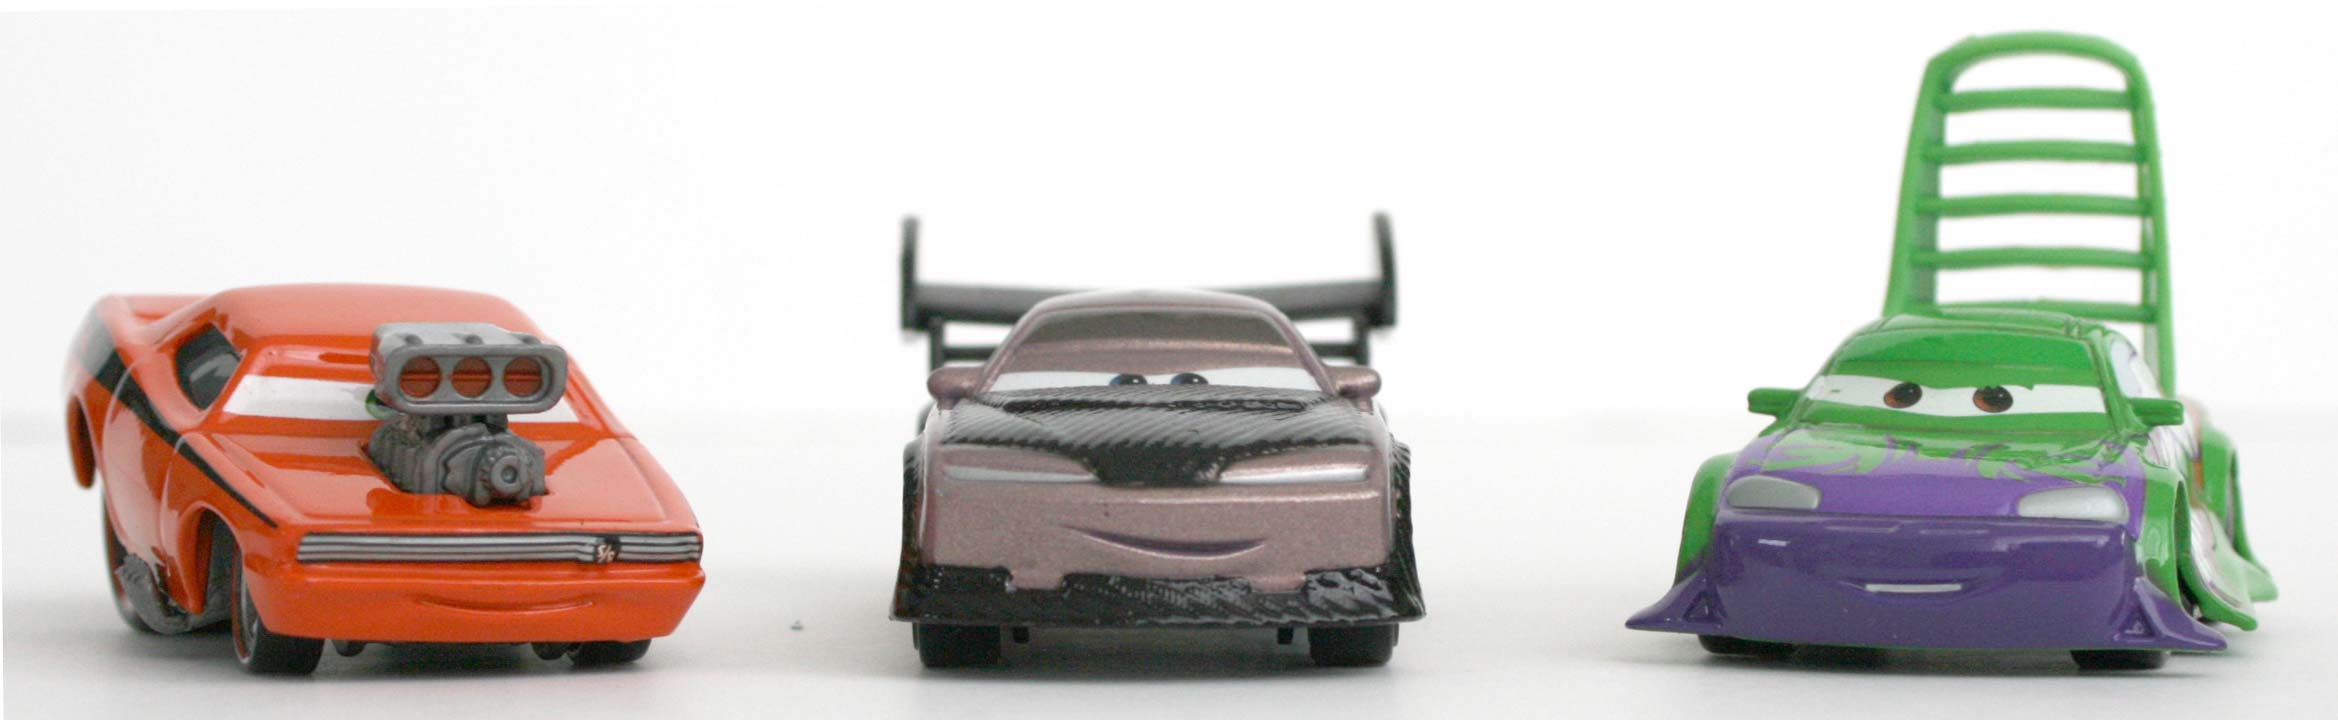 Mattel : Cars Supercharged – Pack Tuning : Snot Rod, Boost, Wingo (2007)